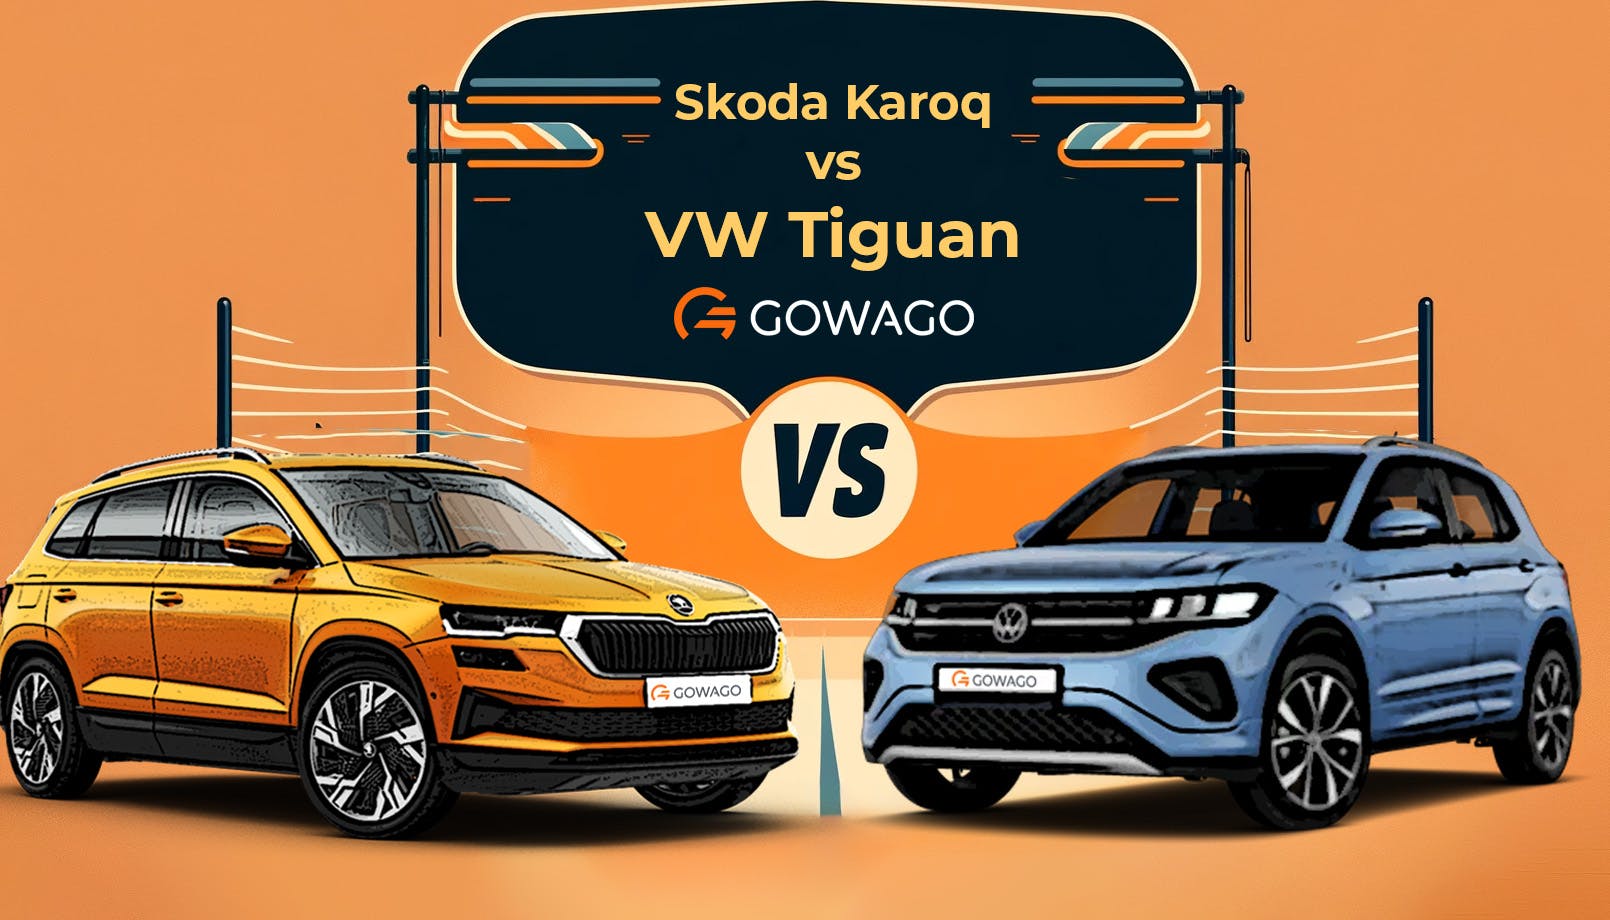 blog item card - Skoda Karoq vs VW Tiguan: Discover the differences between these SUVs and make the right choice for your next lease!